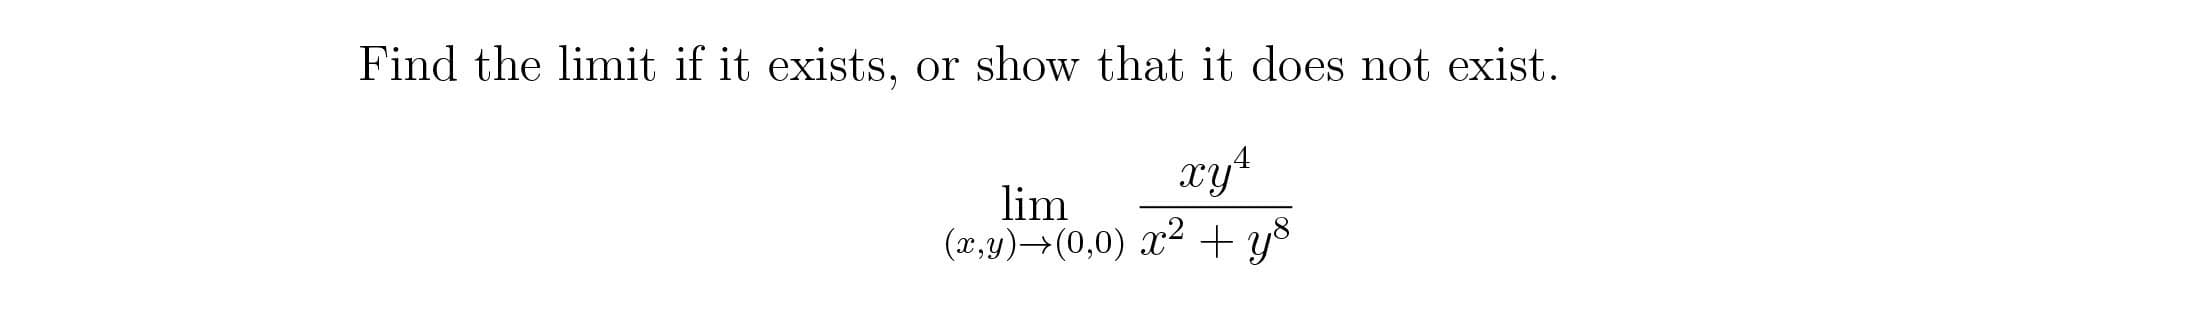 Find the limit if it exists, or show that it does not exist.
xy
lim
(x,y)→(0,0) x² + y8
